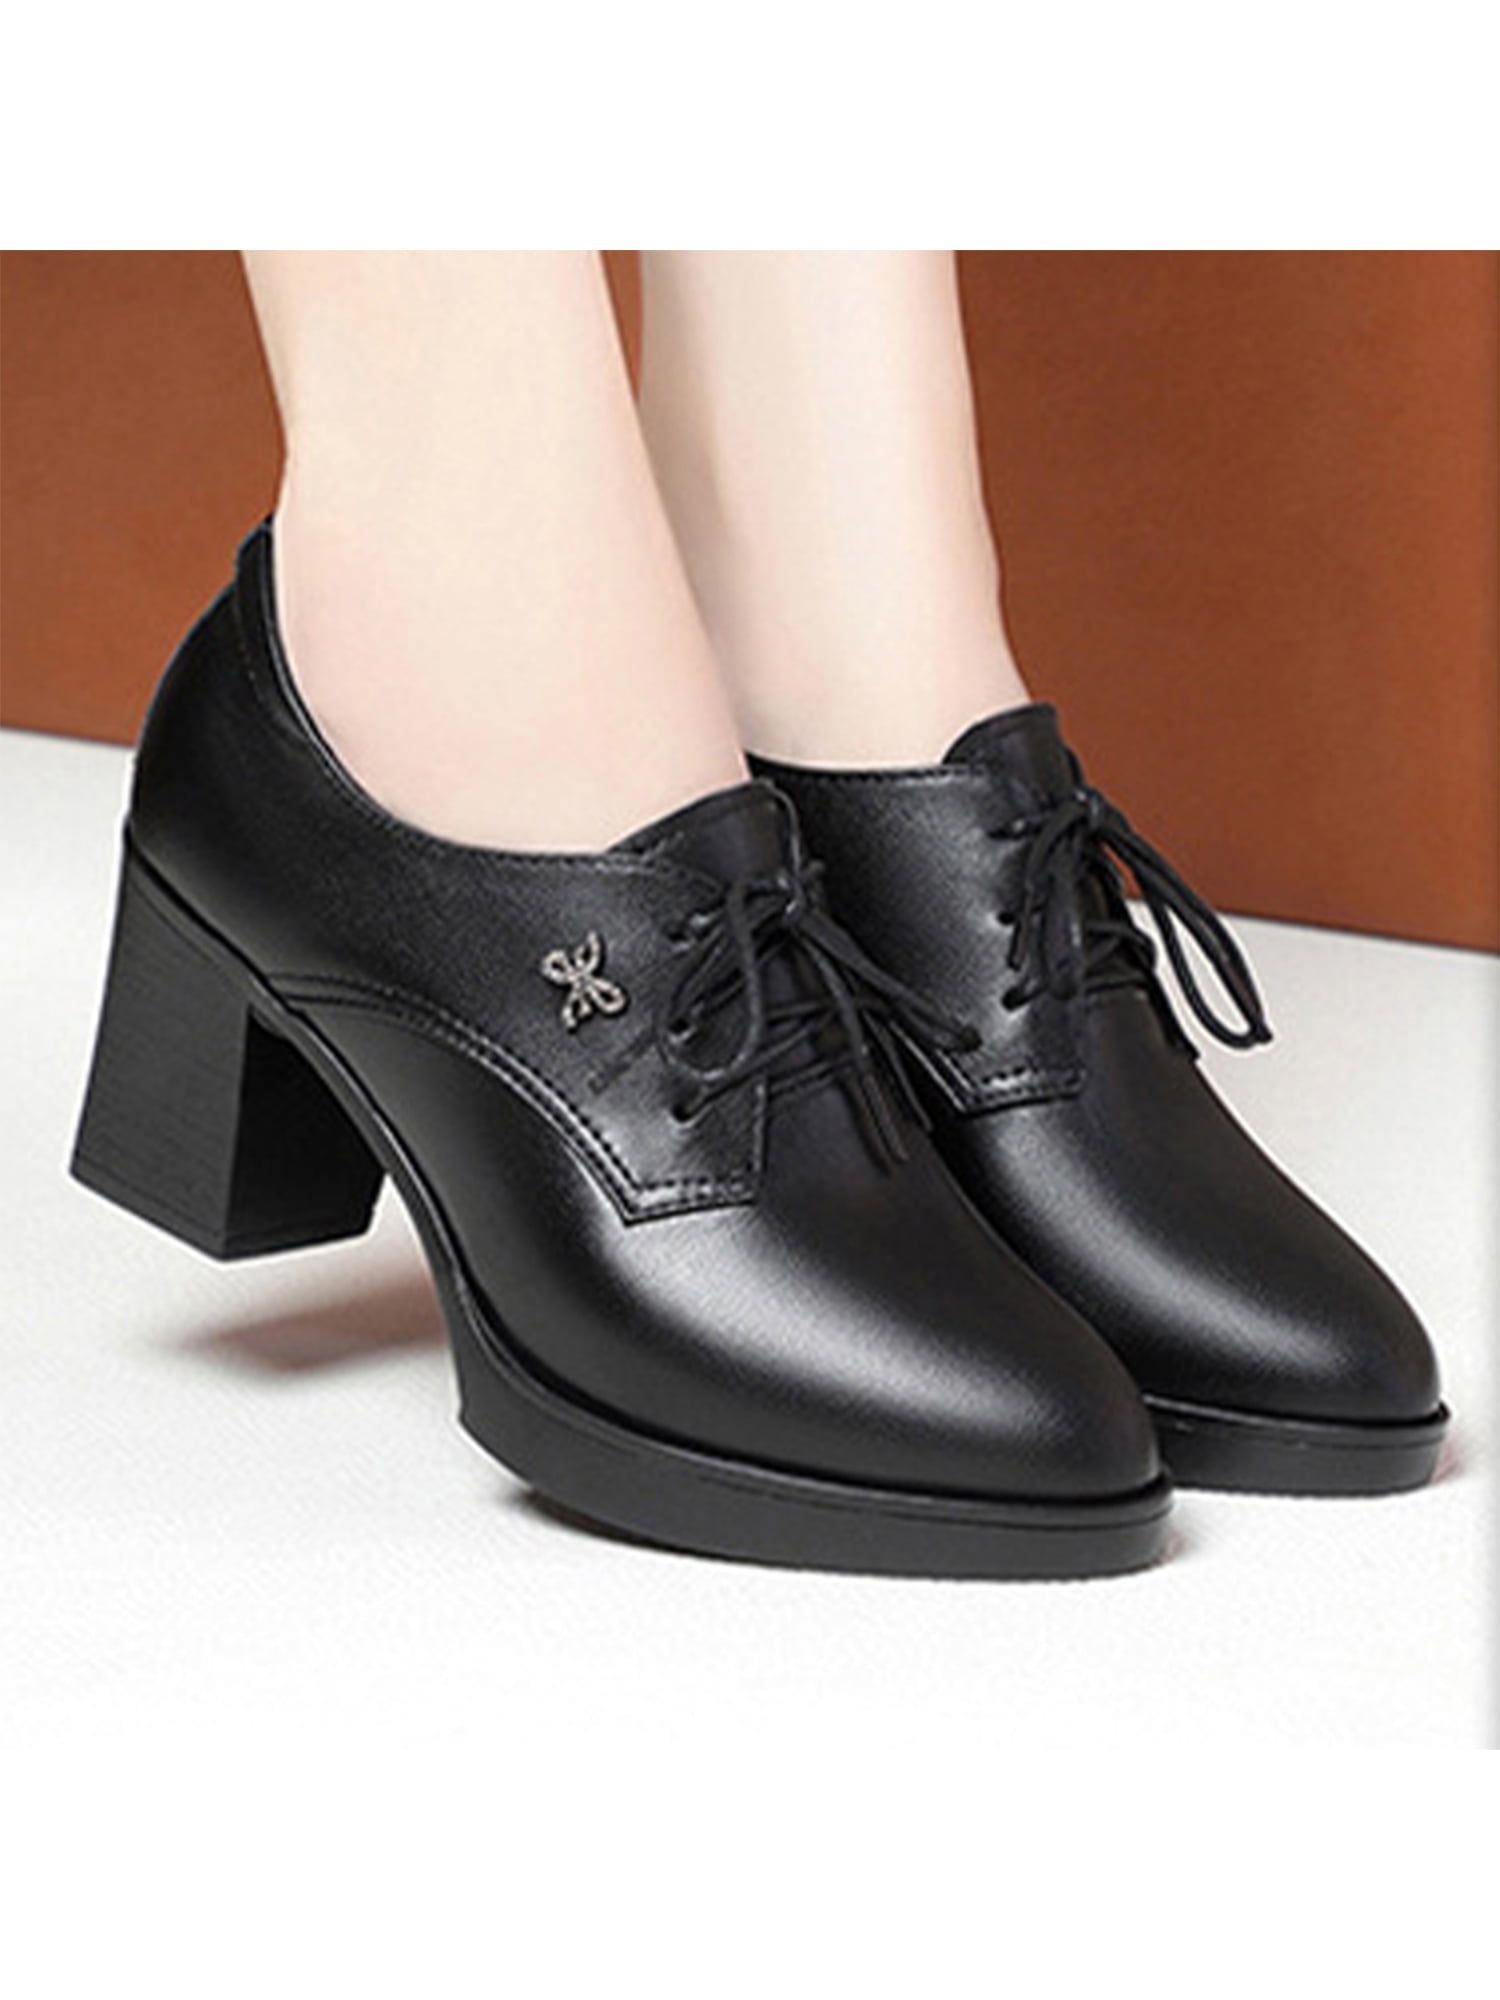 Oxford Shoes with Gray Shoelaces on a Flat Heel. Gray Women`s Shoes in a  Fastening, Unwitting. Stock Image - Image of footwear, child: 211296925